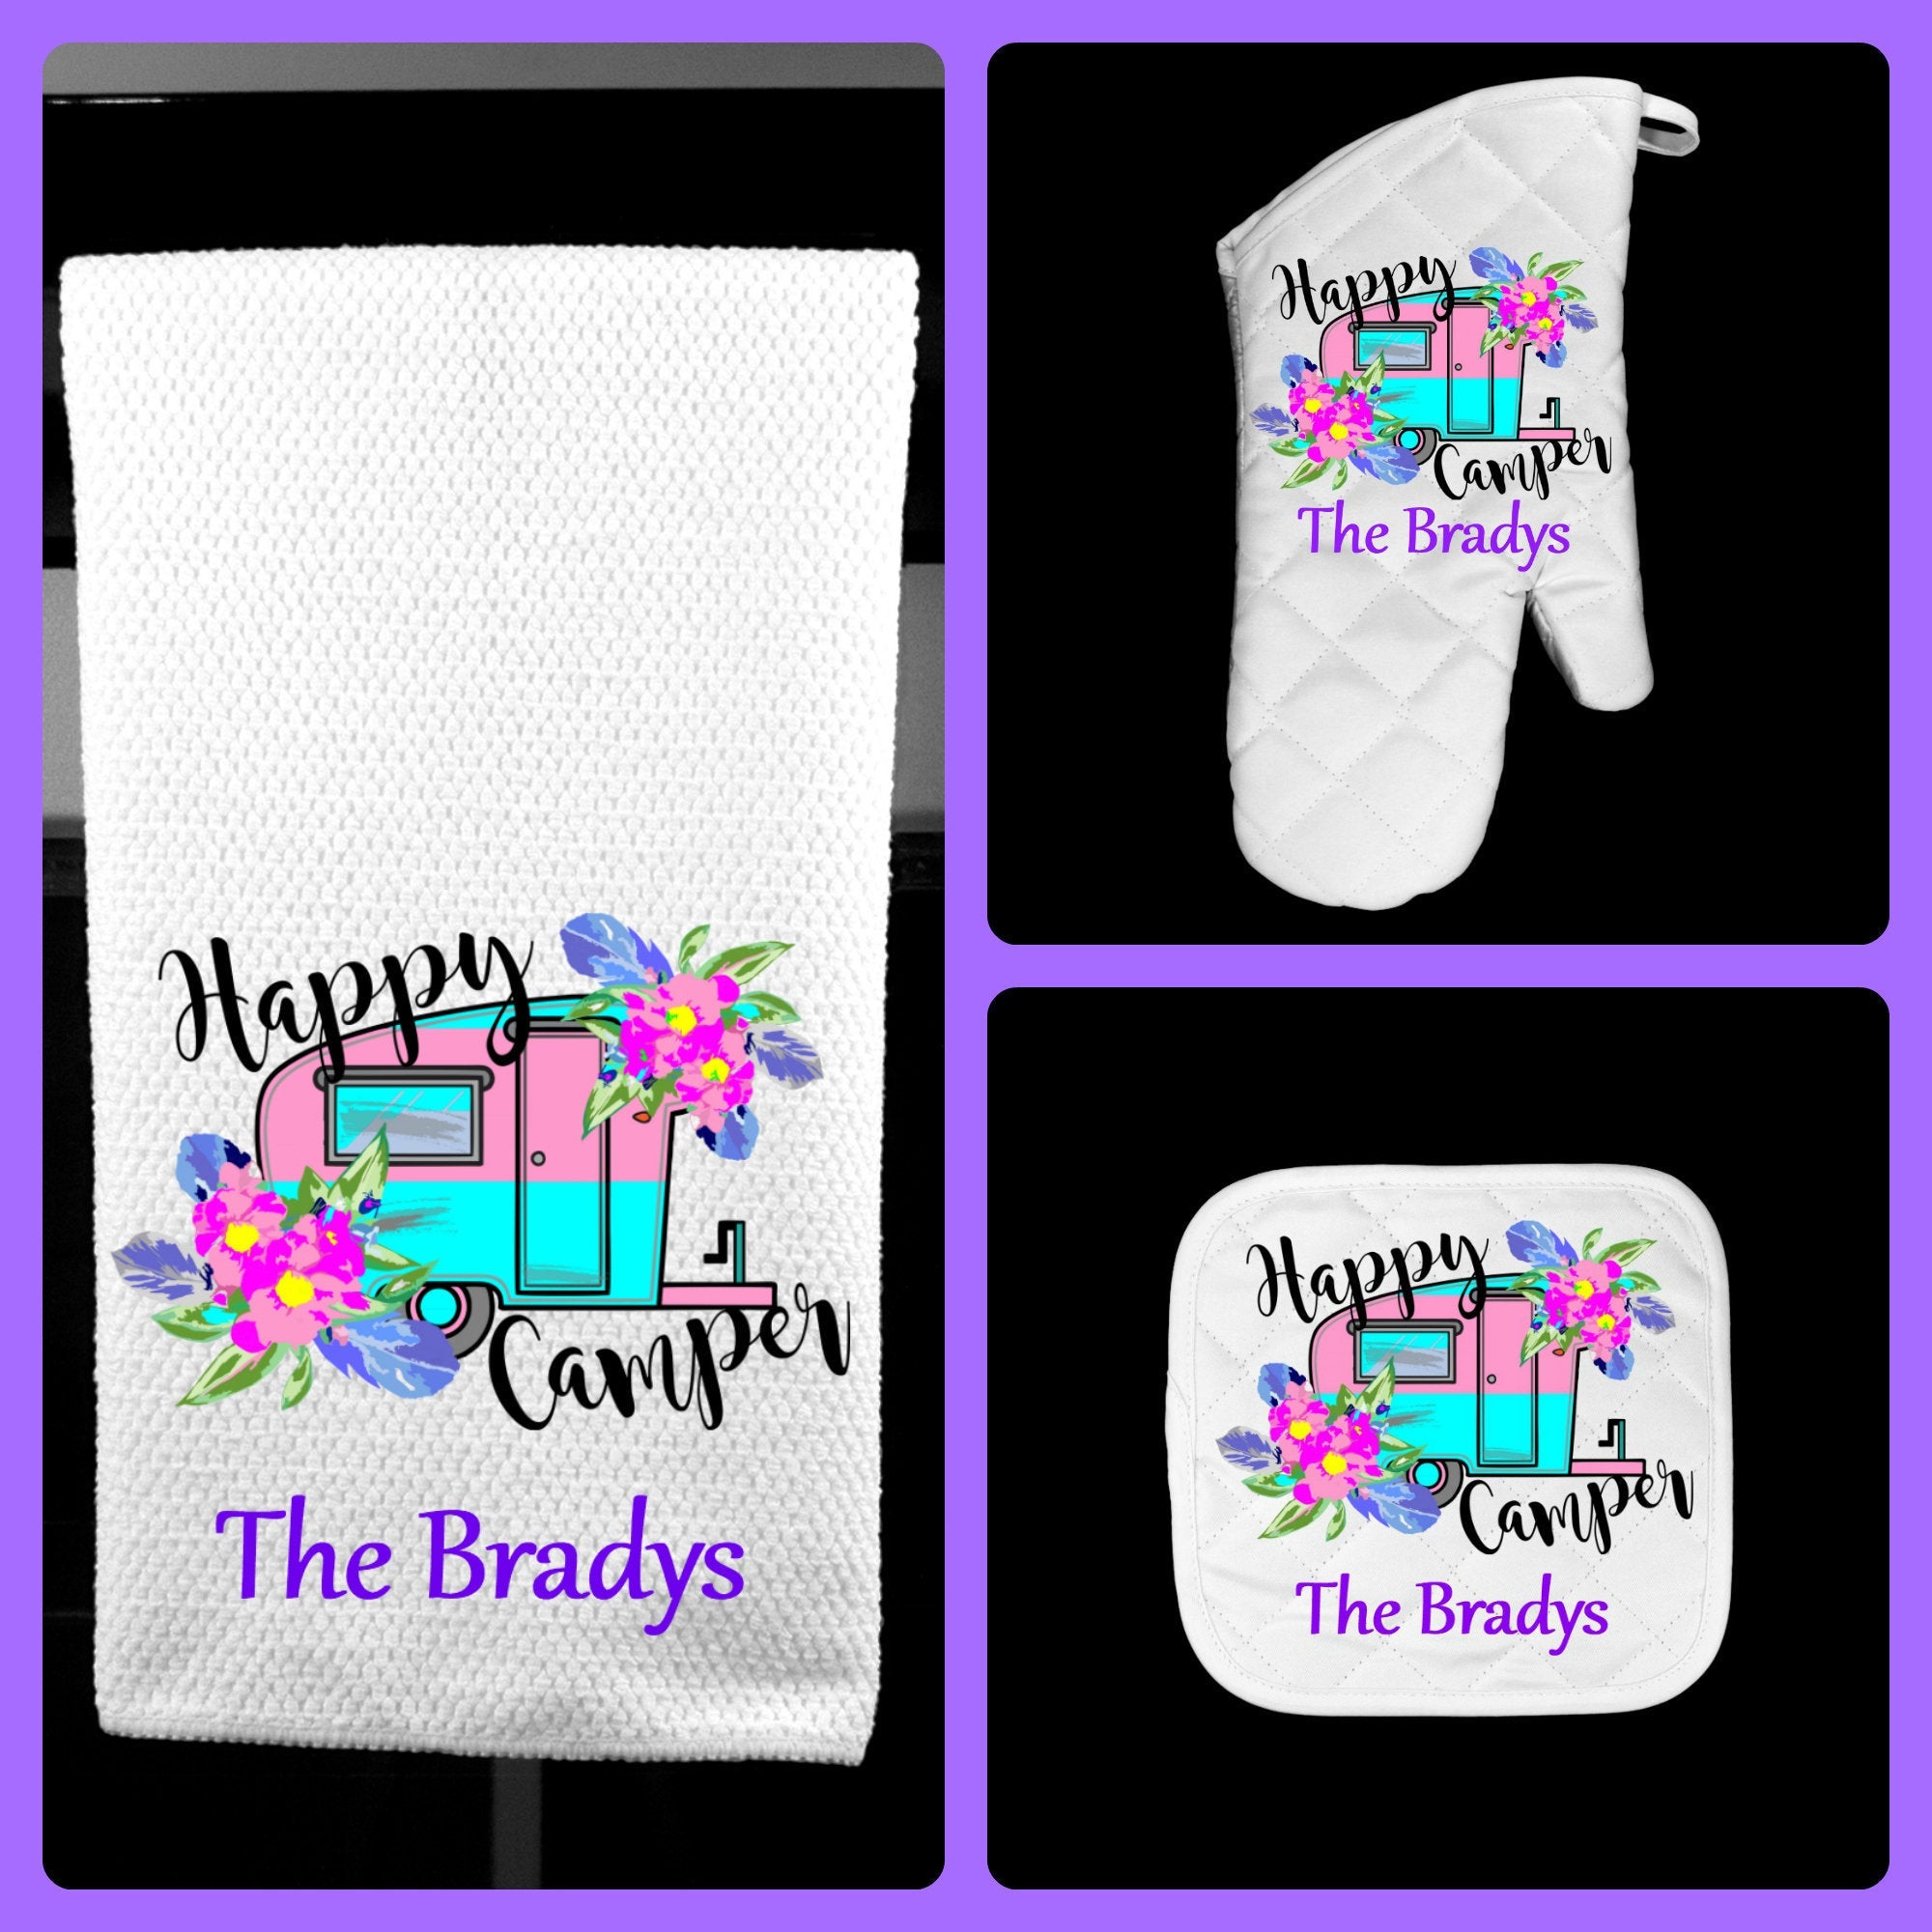 Personalized Oven Mitt and Pot Holder Set | Personalized Oven mitt |  Personalized Pot Holder | Personalized Kitchen Gifts | Housewarming,  Wedding Gift